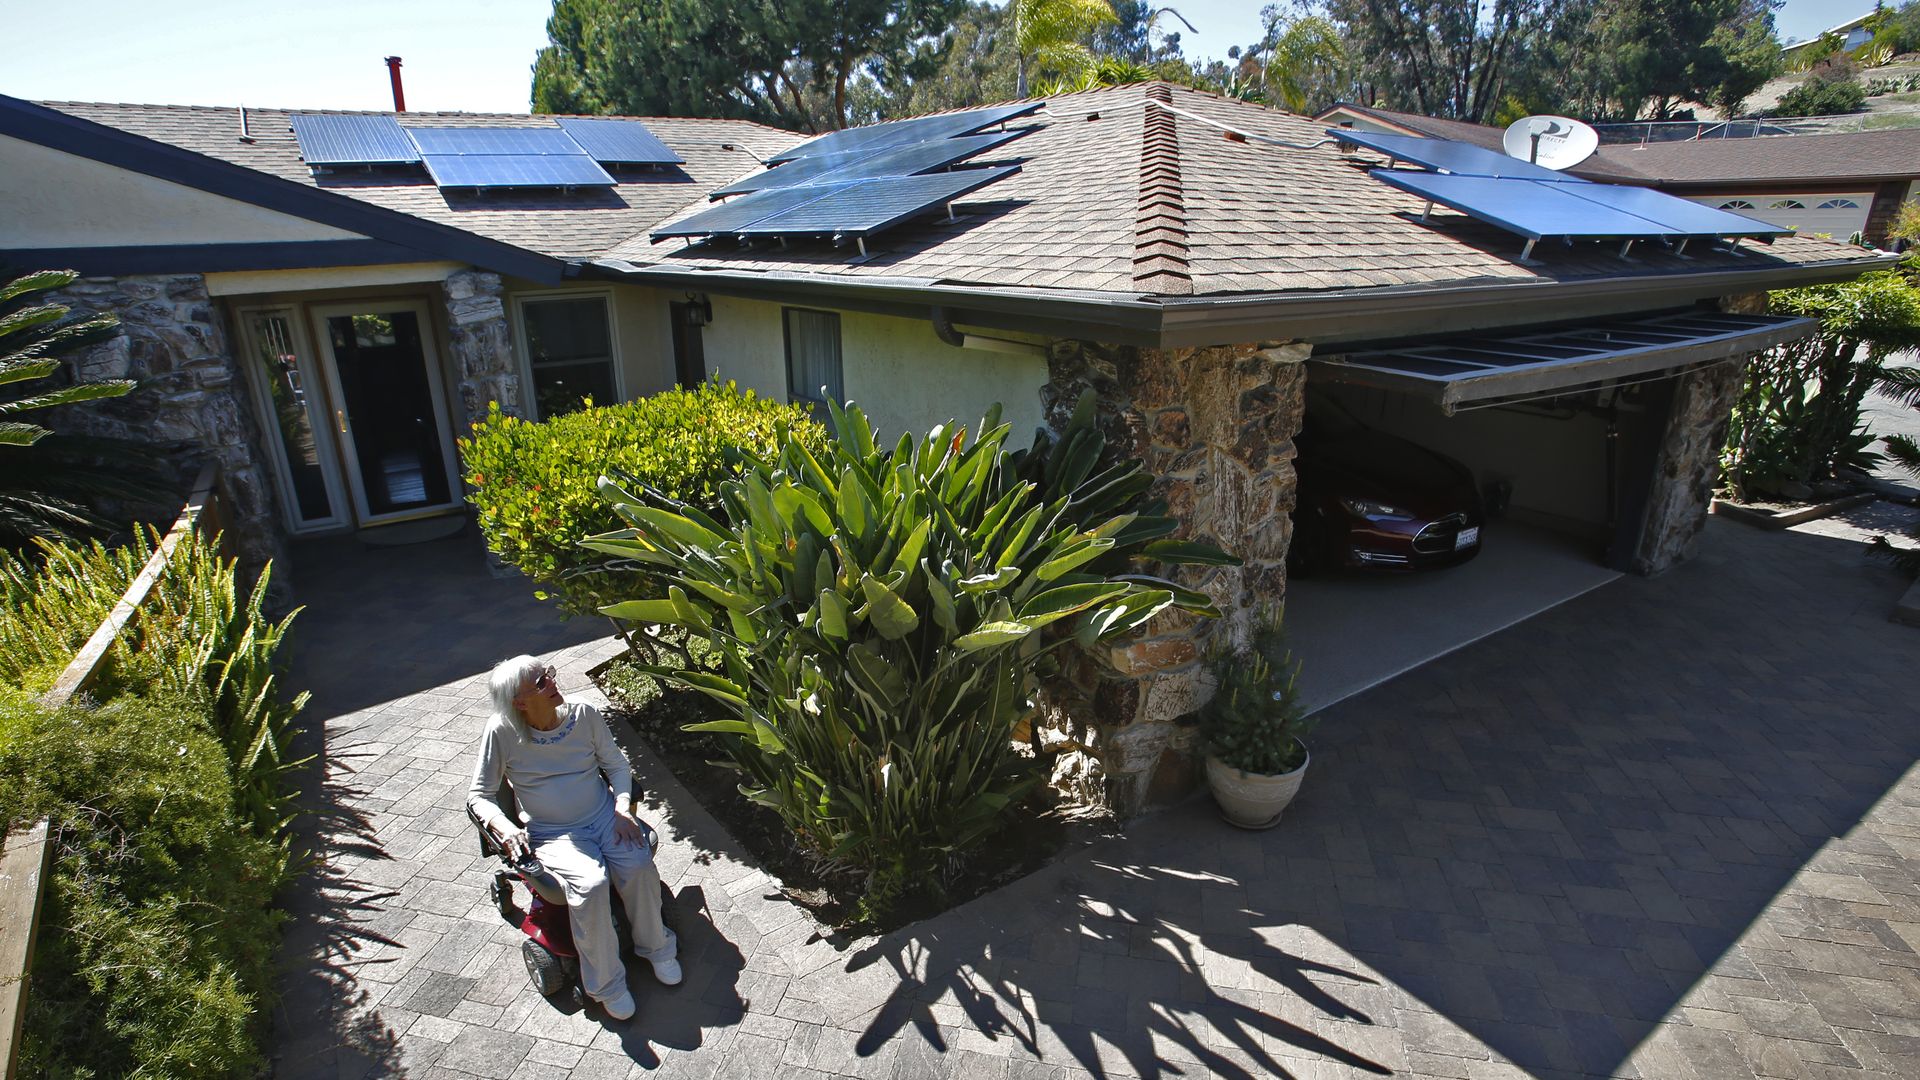 Woman cruises around her Oceanside home that has enough solar collectors on the roof to charge her wheelchair, her electric car and run all the household appliances.